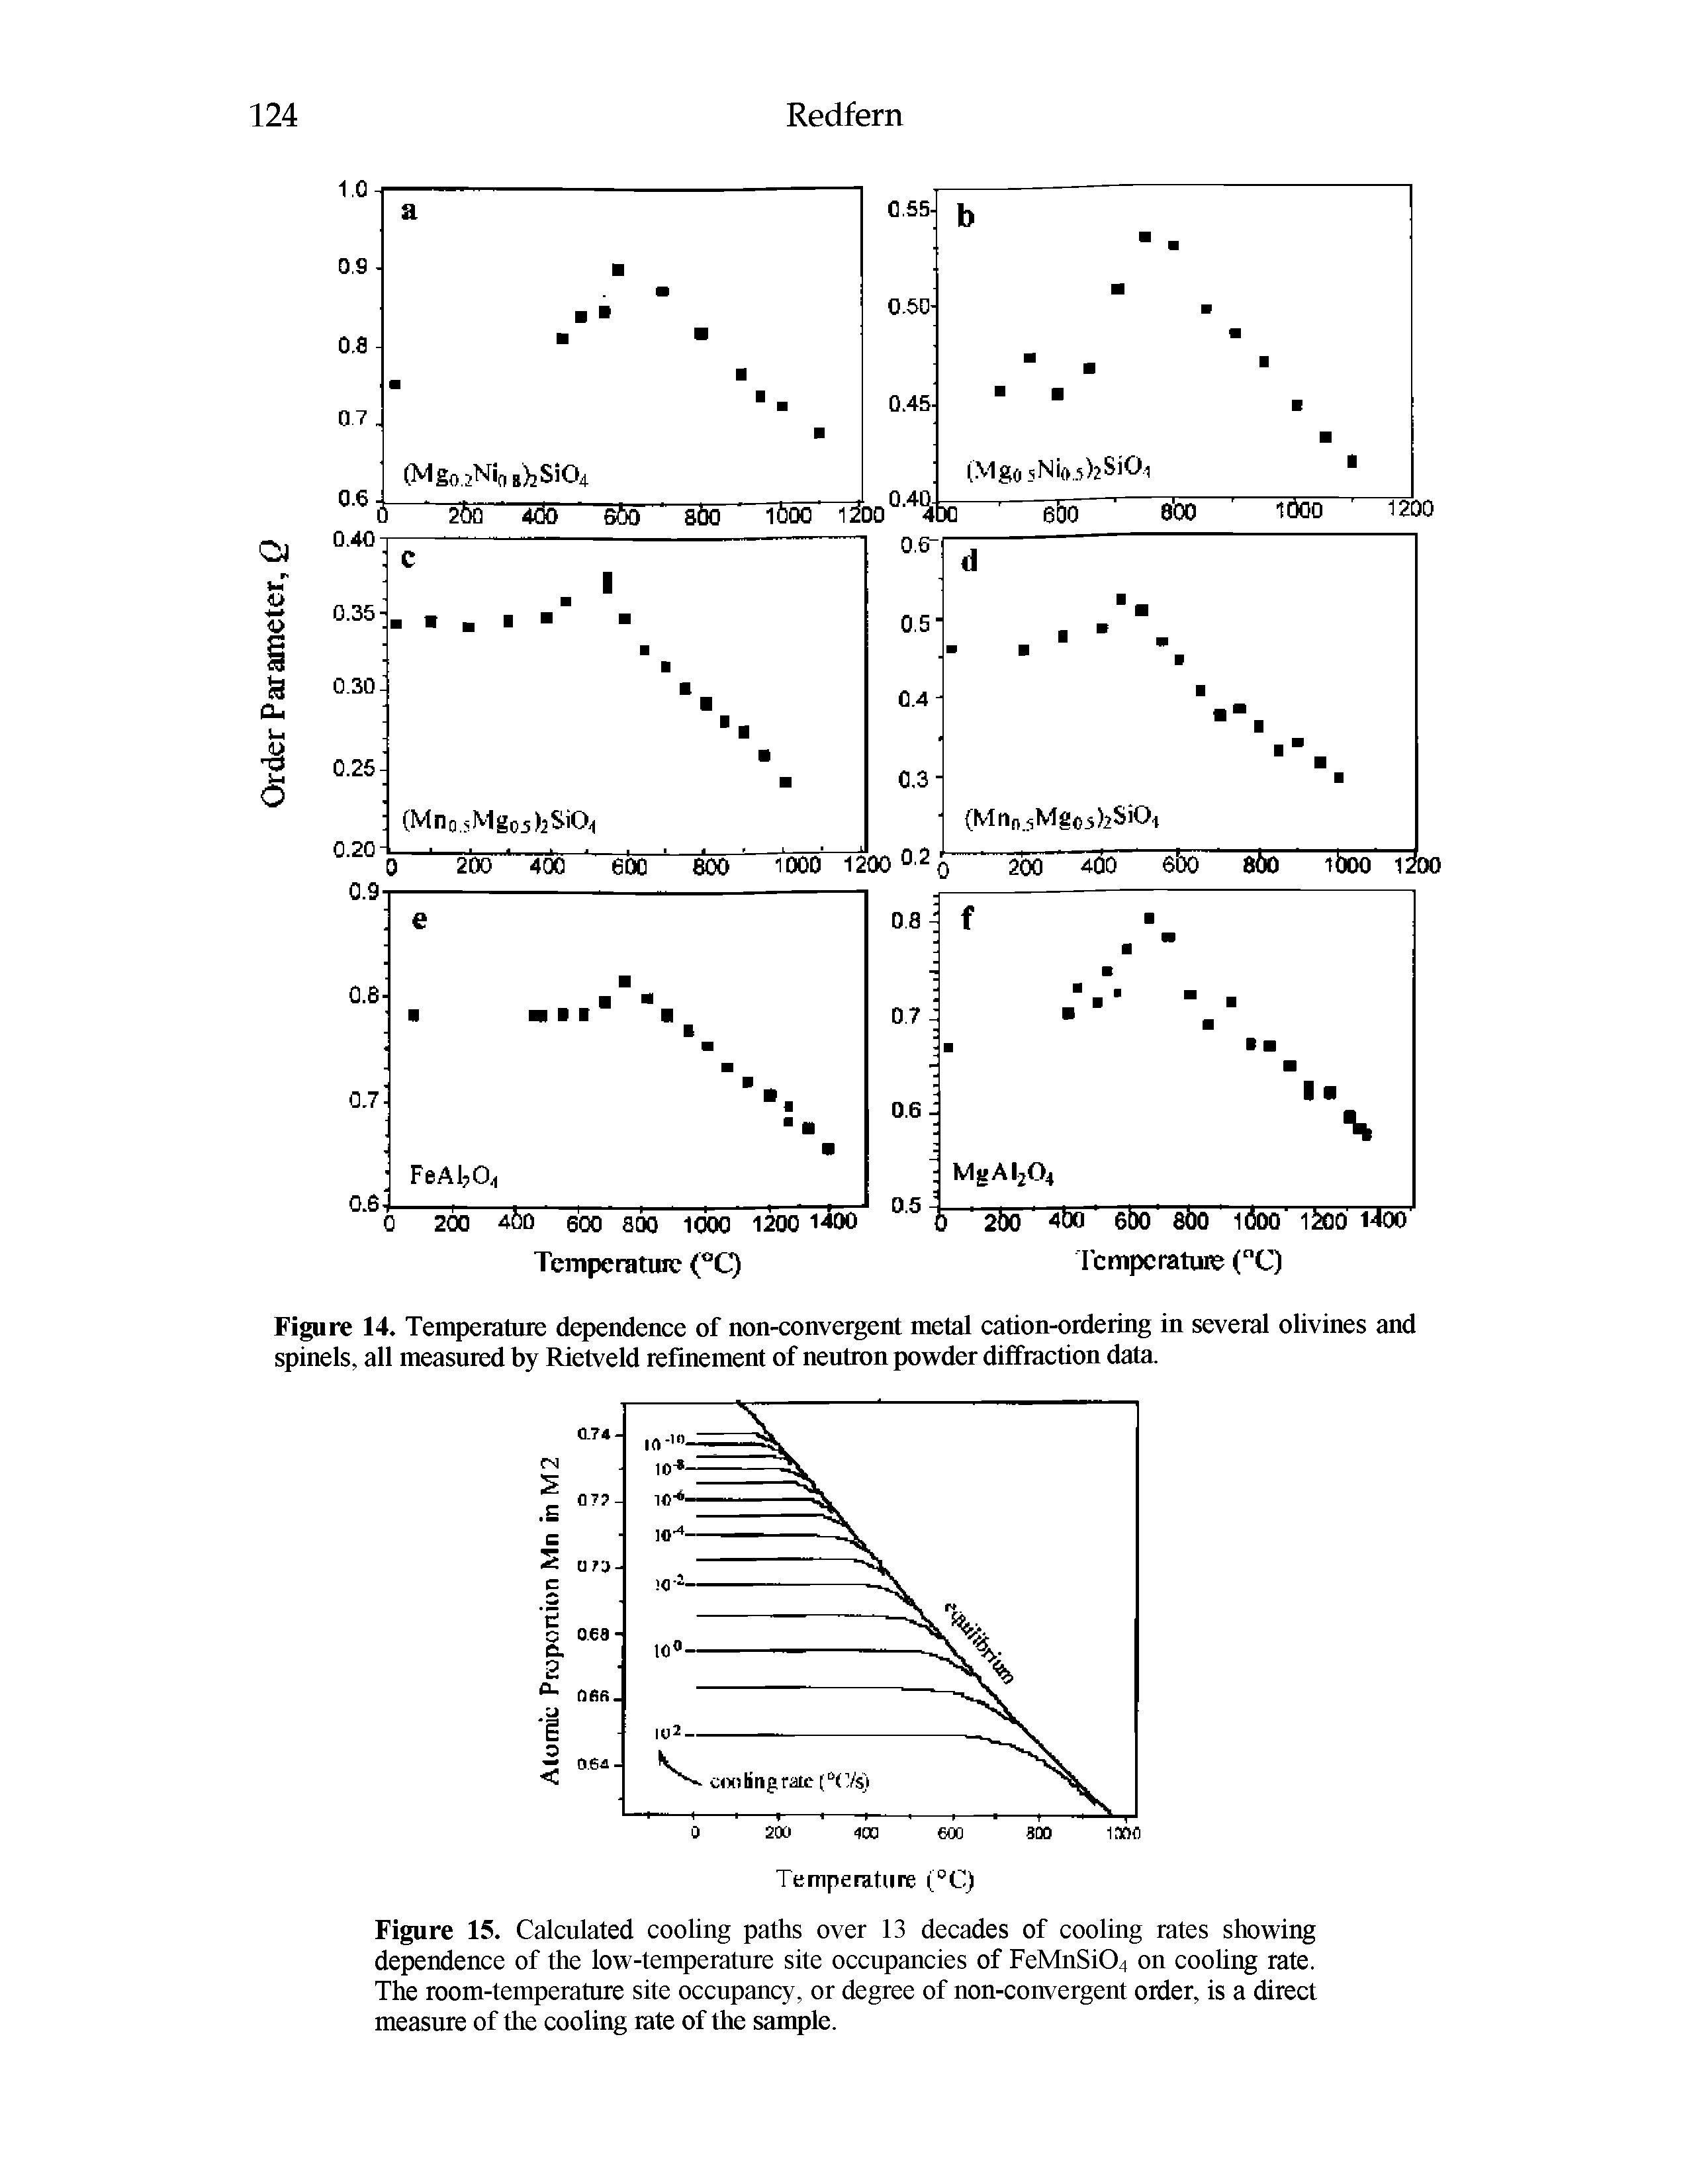 Figure 15. Calculated cooling paths over 13 decades of cooling rates showing dependence of the low-temperature site occupancies of FeMnSi04 on cooling rate. The room-temperature site occupancy, or degree of non-convergent order, is a direct measure of the cooling rate of the sample.